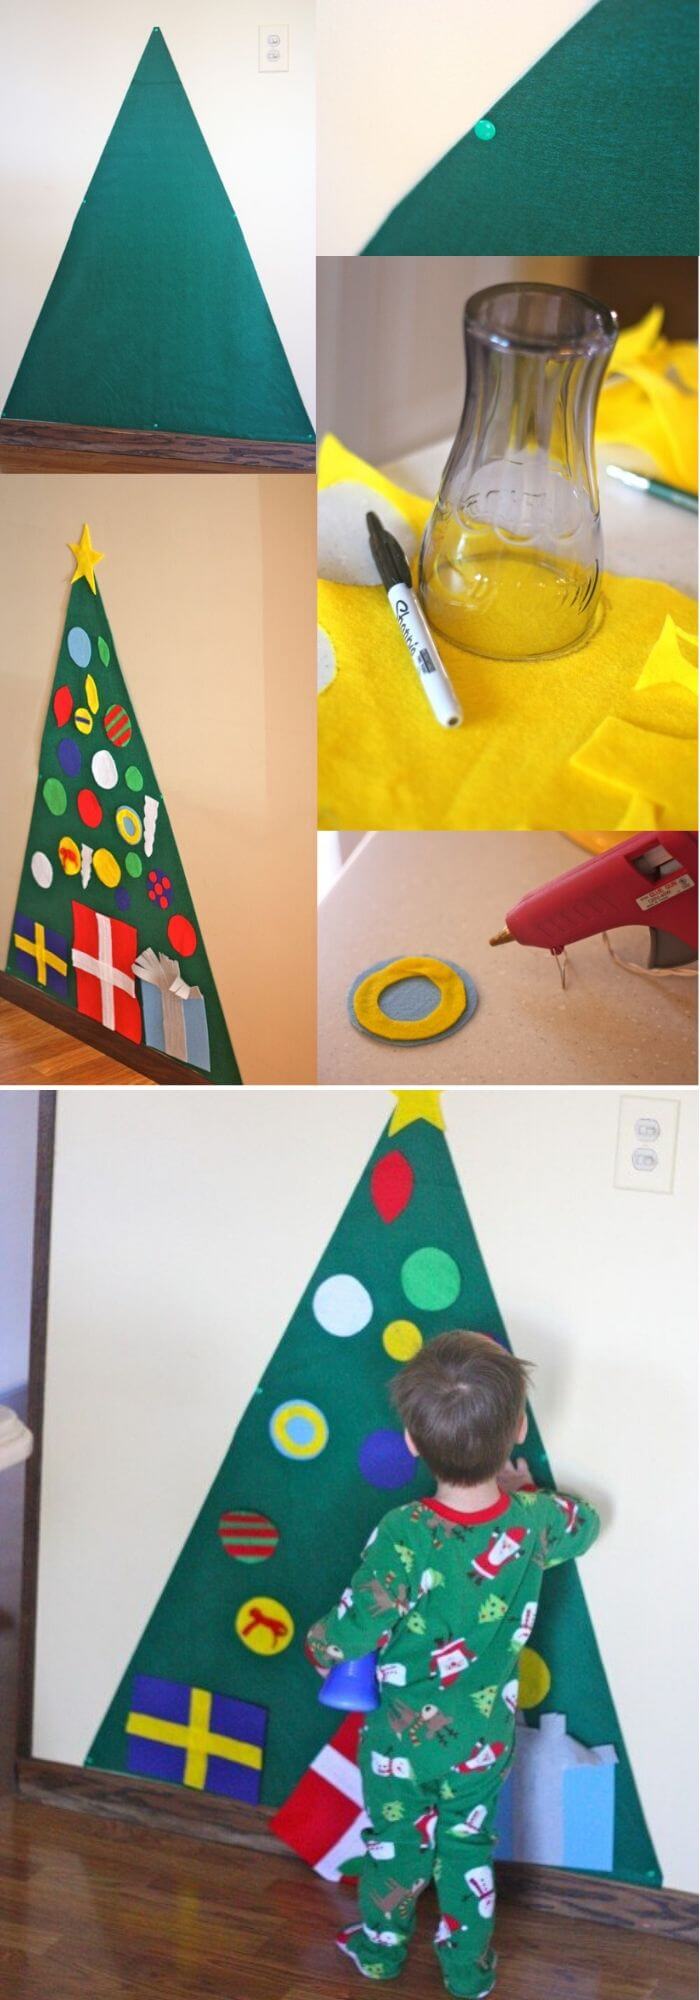 15 cool crafts for kids